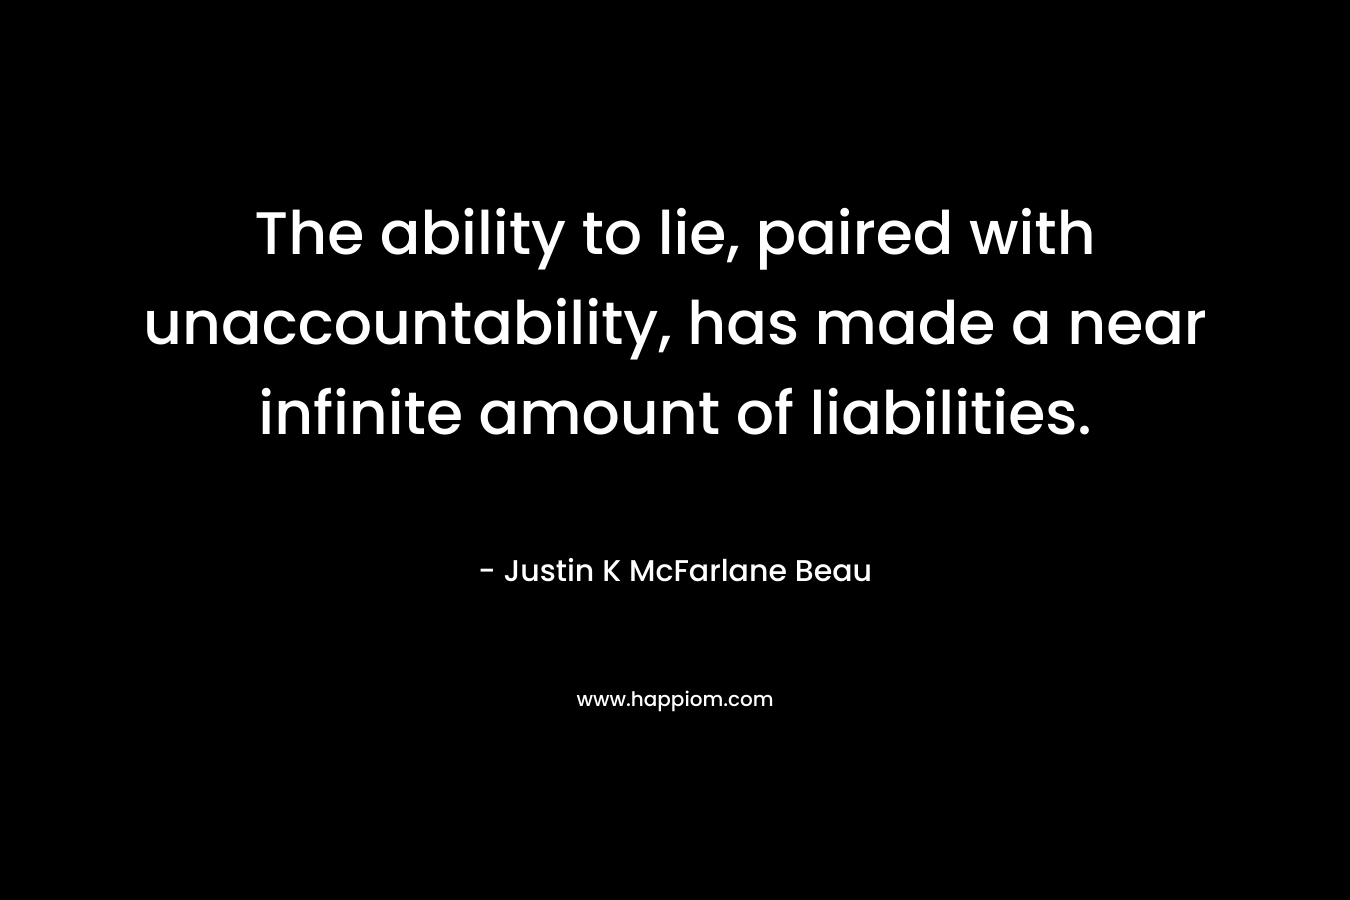 The ability to lie, paired with unaccountability, has made a near infinite amount of liabilities. – Justin K McFarlane Beau